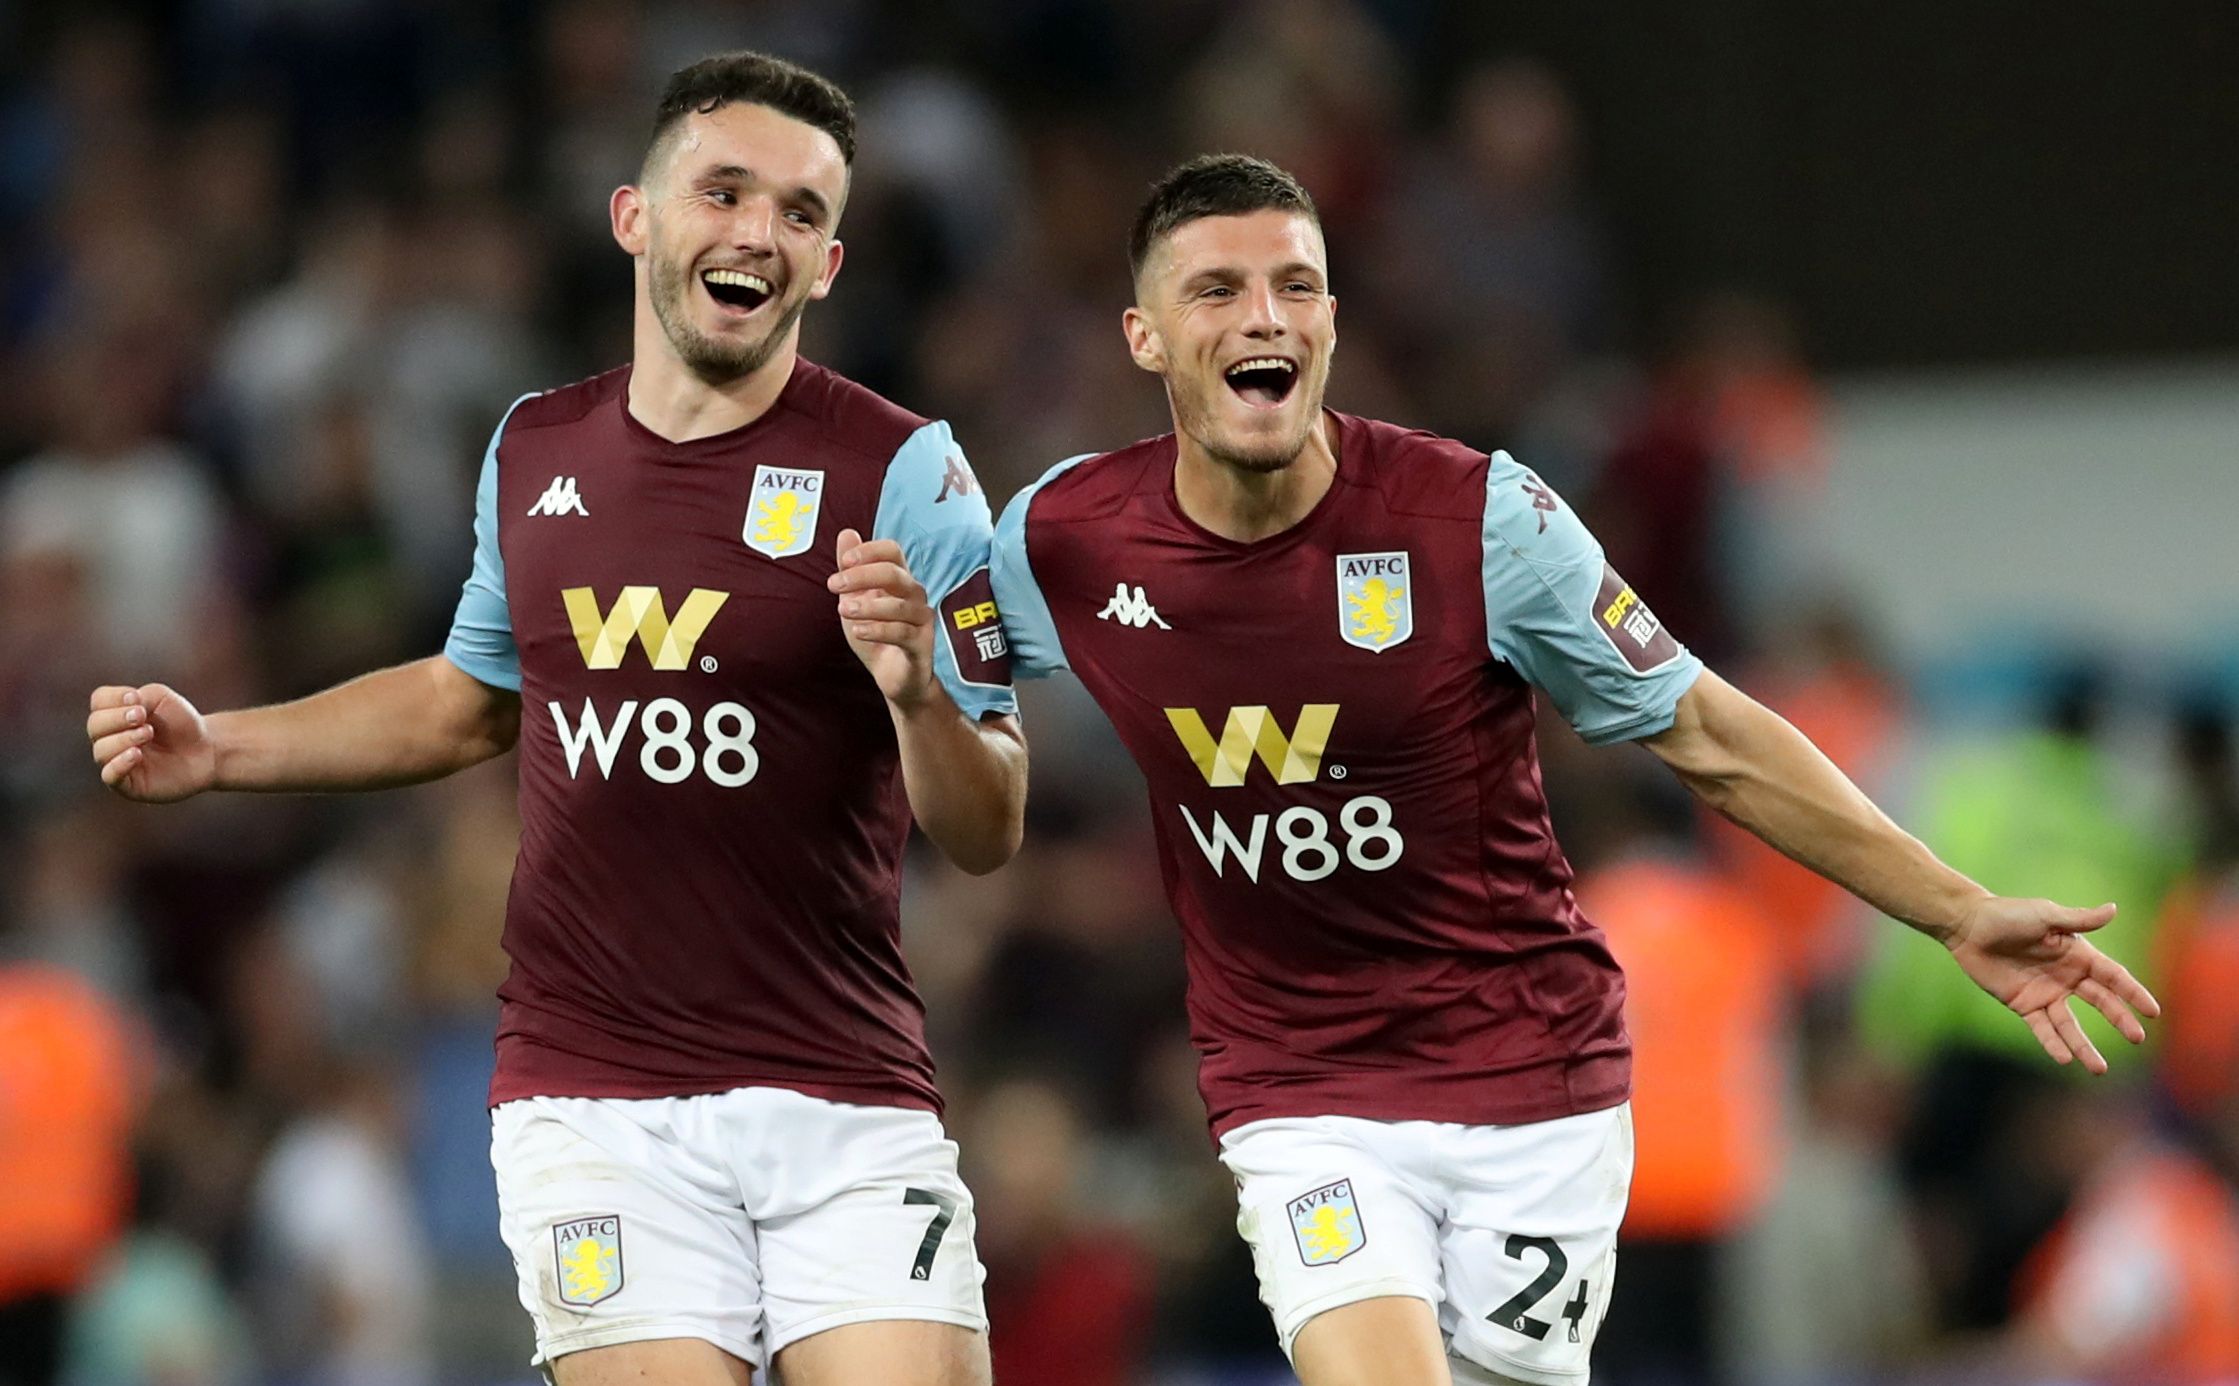 Soccer Football - Premier League - Aston Villa v Everton - Villa Park, Birmingham, Britain - August 23, 2019  Aston Villa's John McGinn and Frederic Guilbert celebrate their second goal   Action Images via Reuters/Carl Recine  EDITORIAL USE ONLY. No use with unauthorized audio, video, data, fixture lists, club/league logos or "live" services. Online in-match use limited to 75 images, no video emulation. No use in betting, games or single club/league/player publications.  Please contact your acco